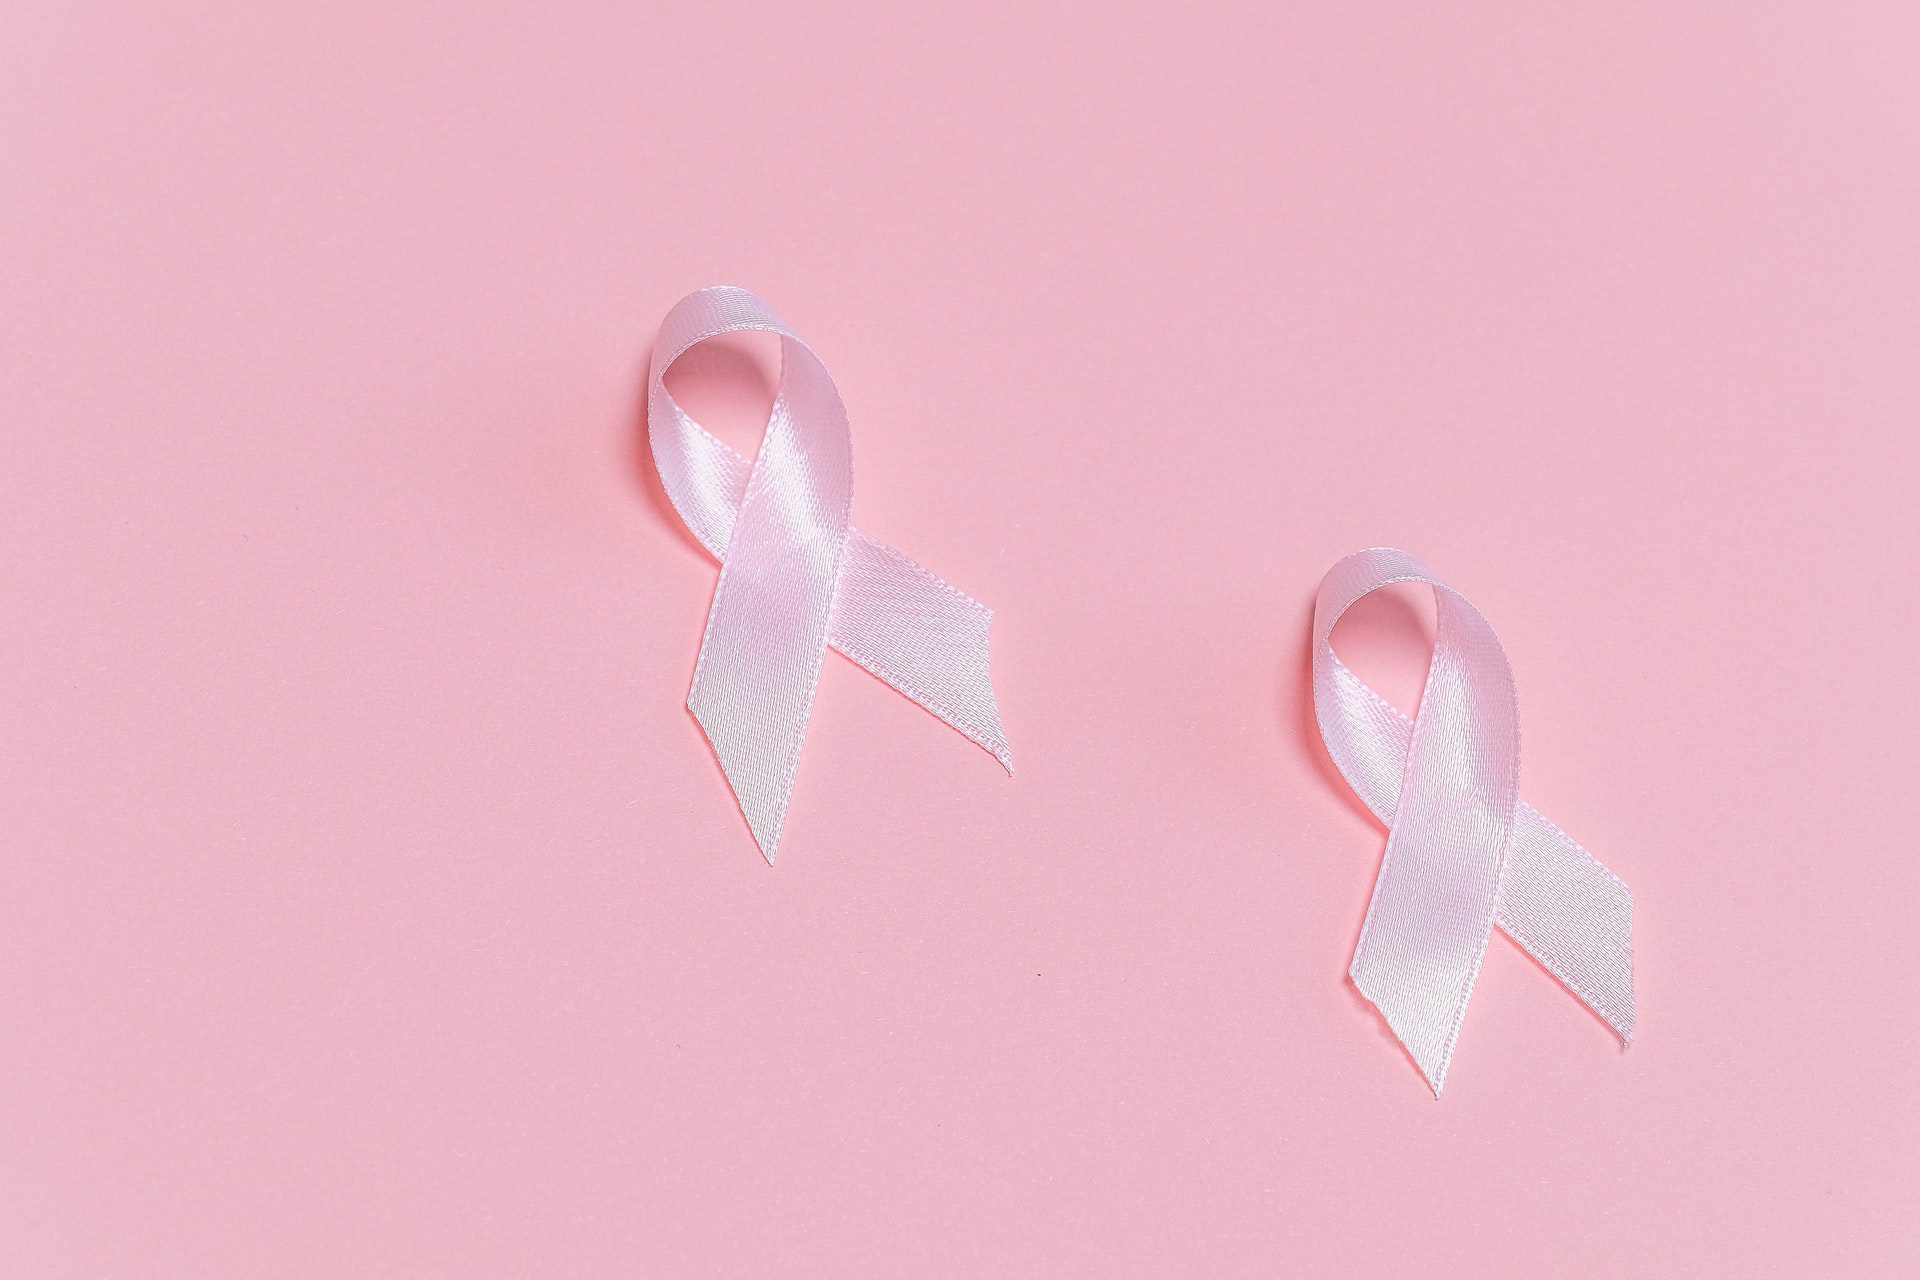 Greater Small business Bytes: Imagine two times before donating to breast cancer awareness campaigns